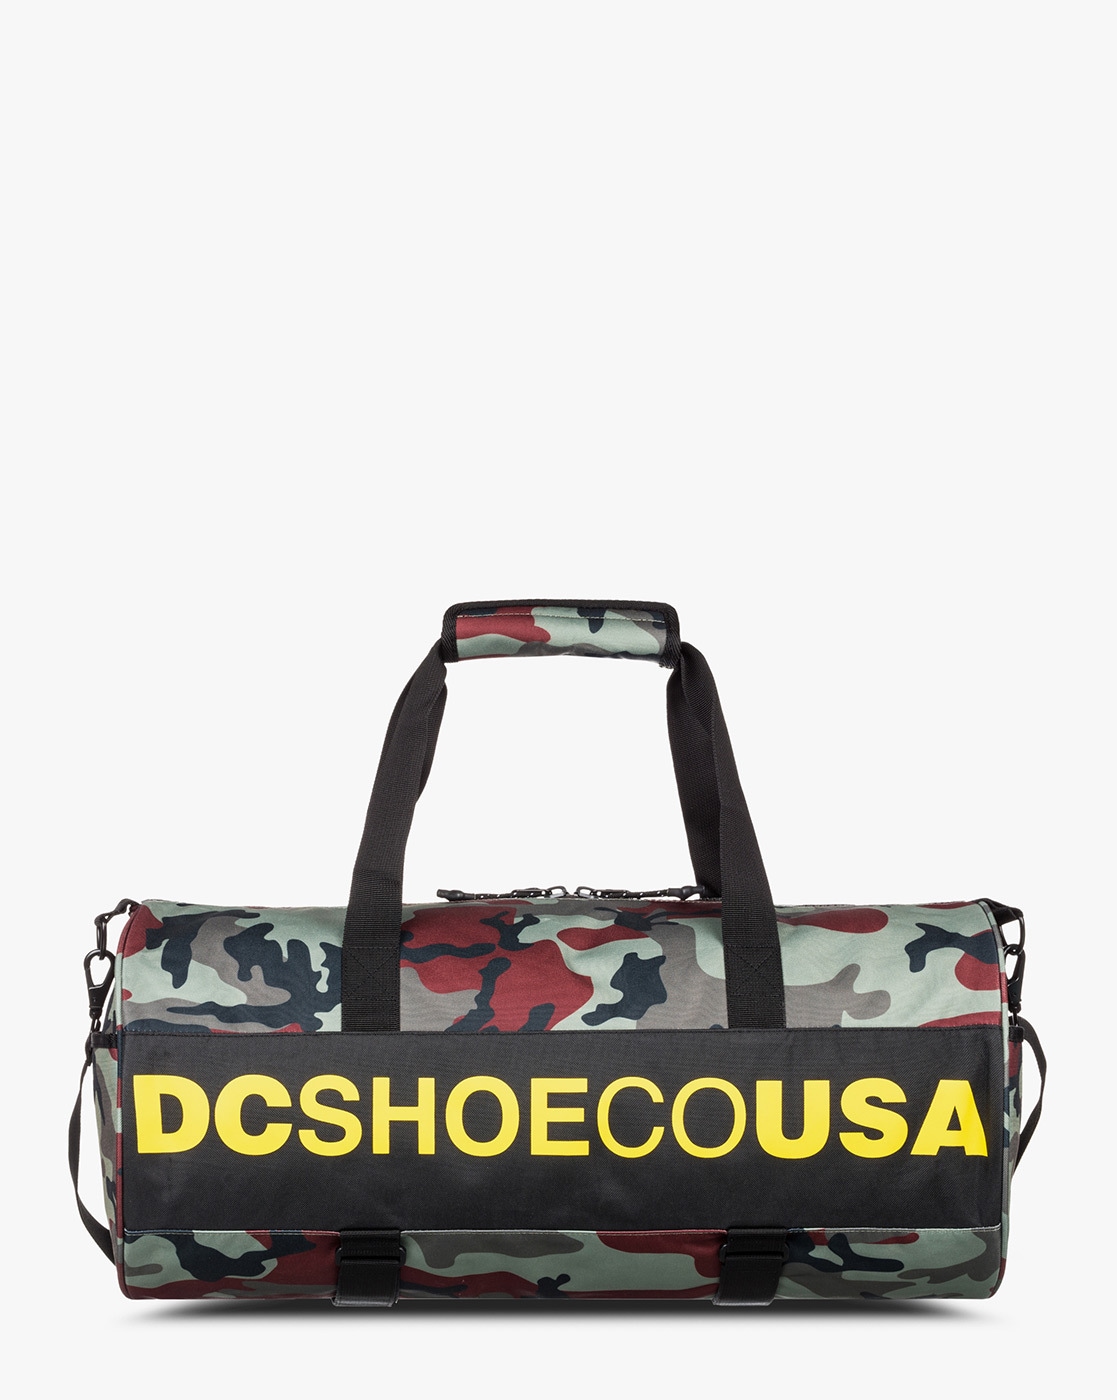 Dc Shoes Tote Bags for Sale | Redbubble